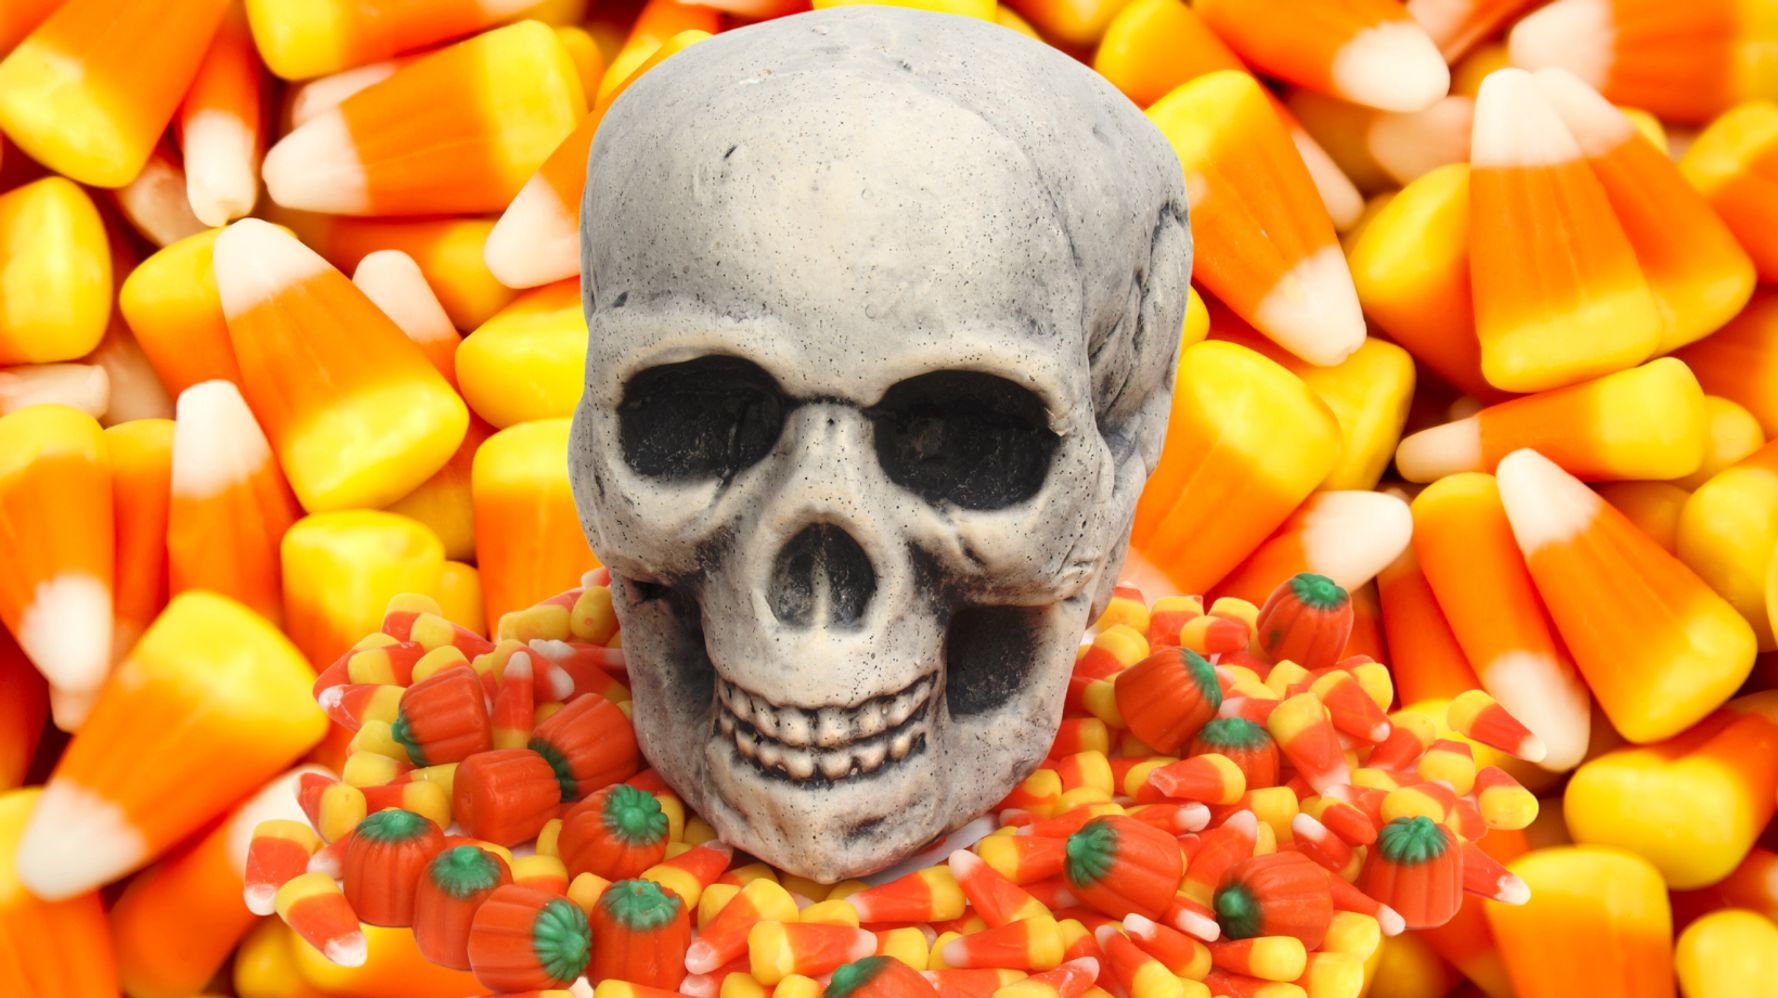 The Exact Amount Of Halloween Candy You Can Eat Before It's Lethal